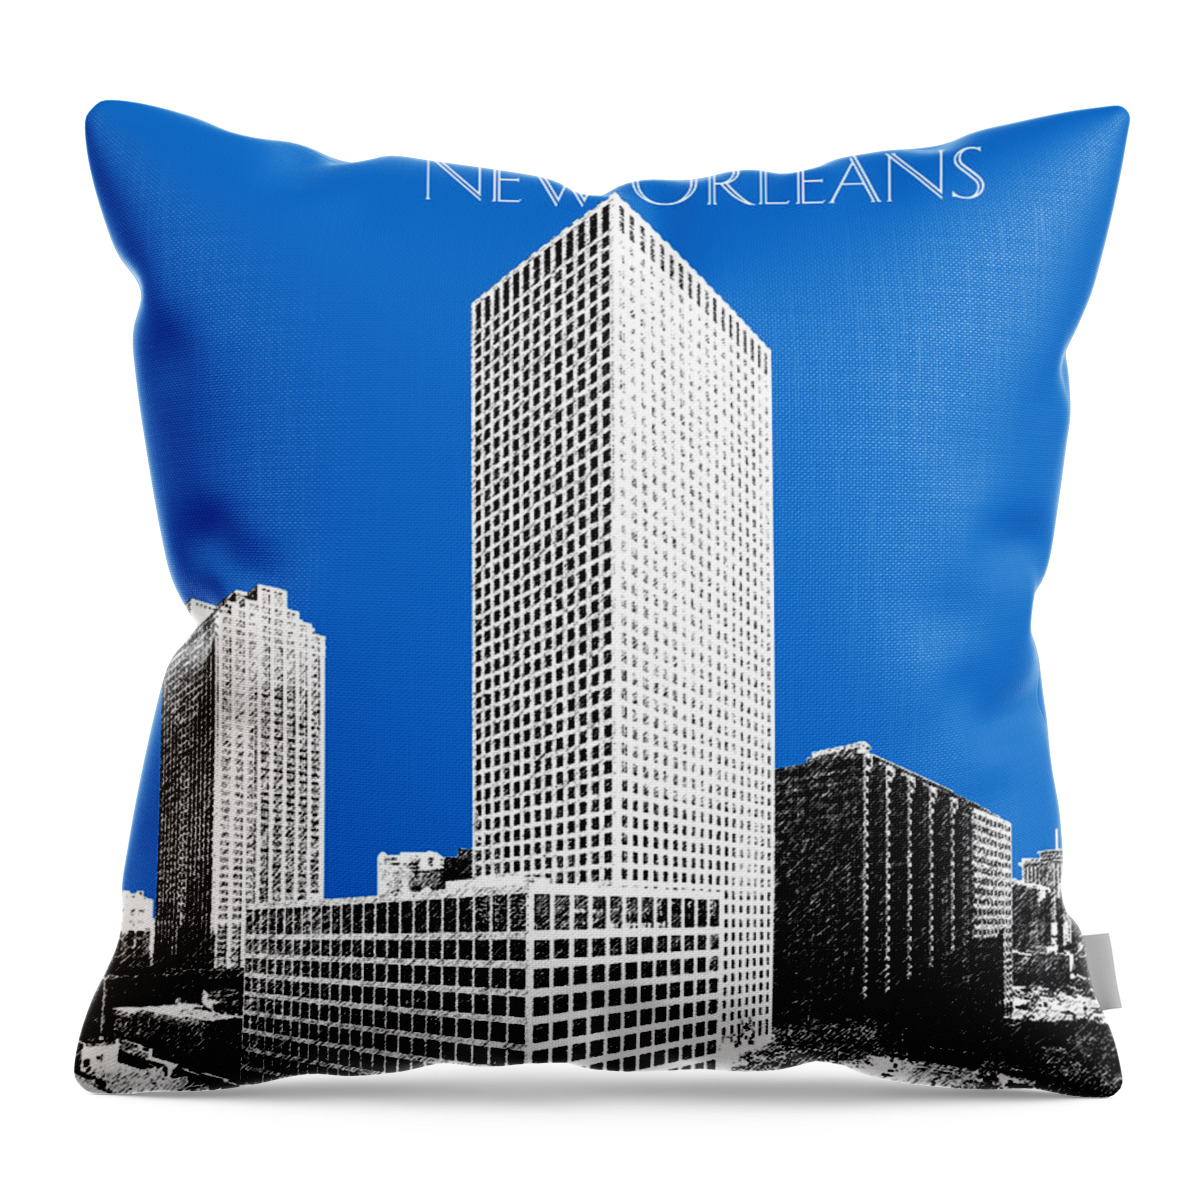 Architecture Throw Pillow featuring the digital art New Orleans Skyline - Blue by DB Artist